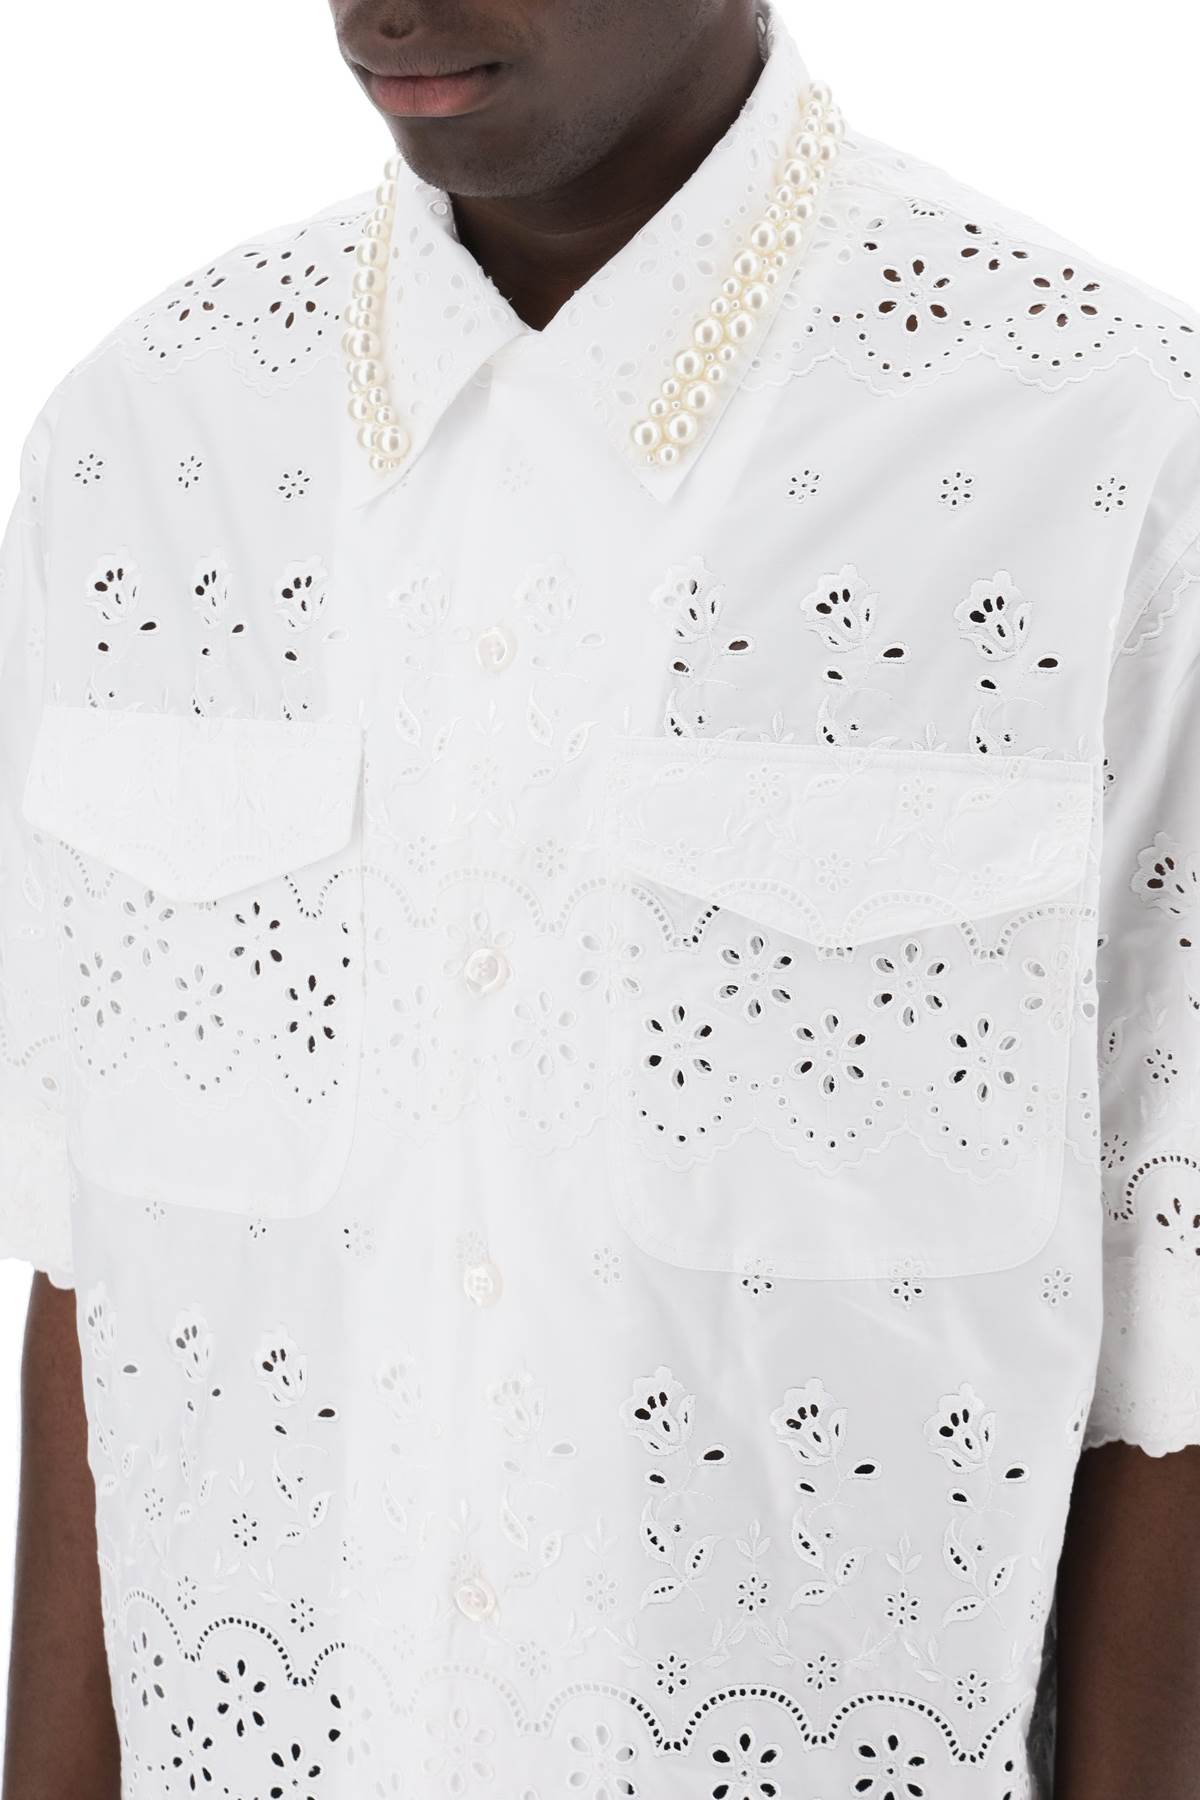 Simone rocha "scalloped lace shirt with pearl-3